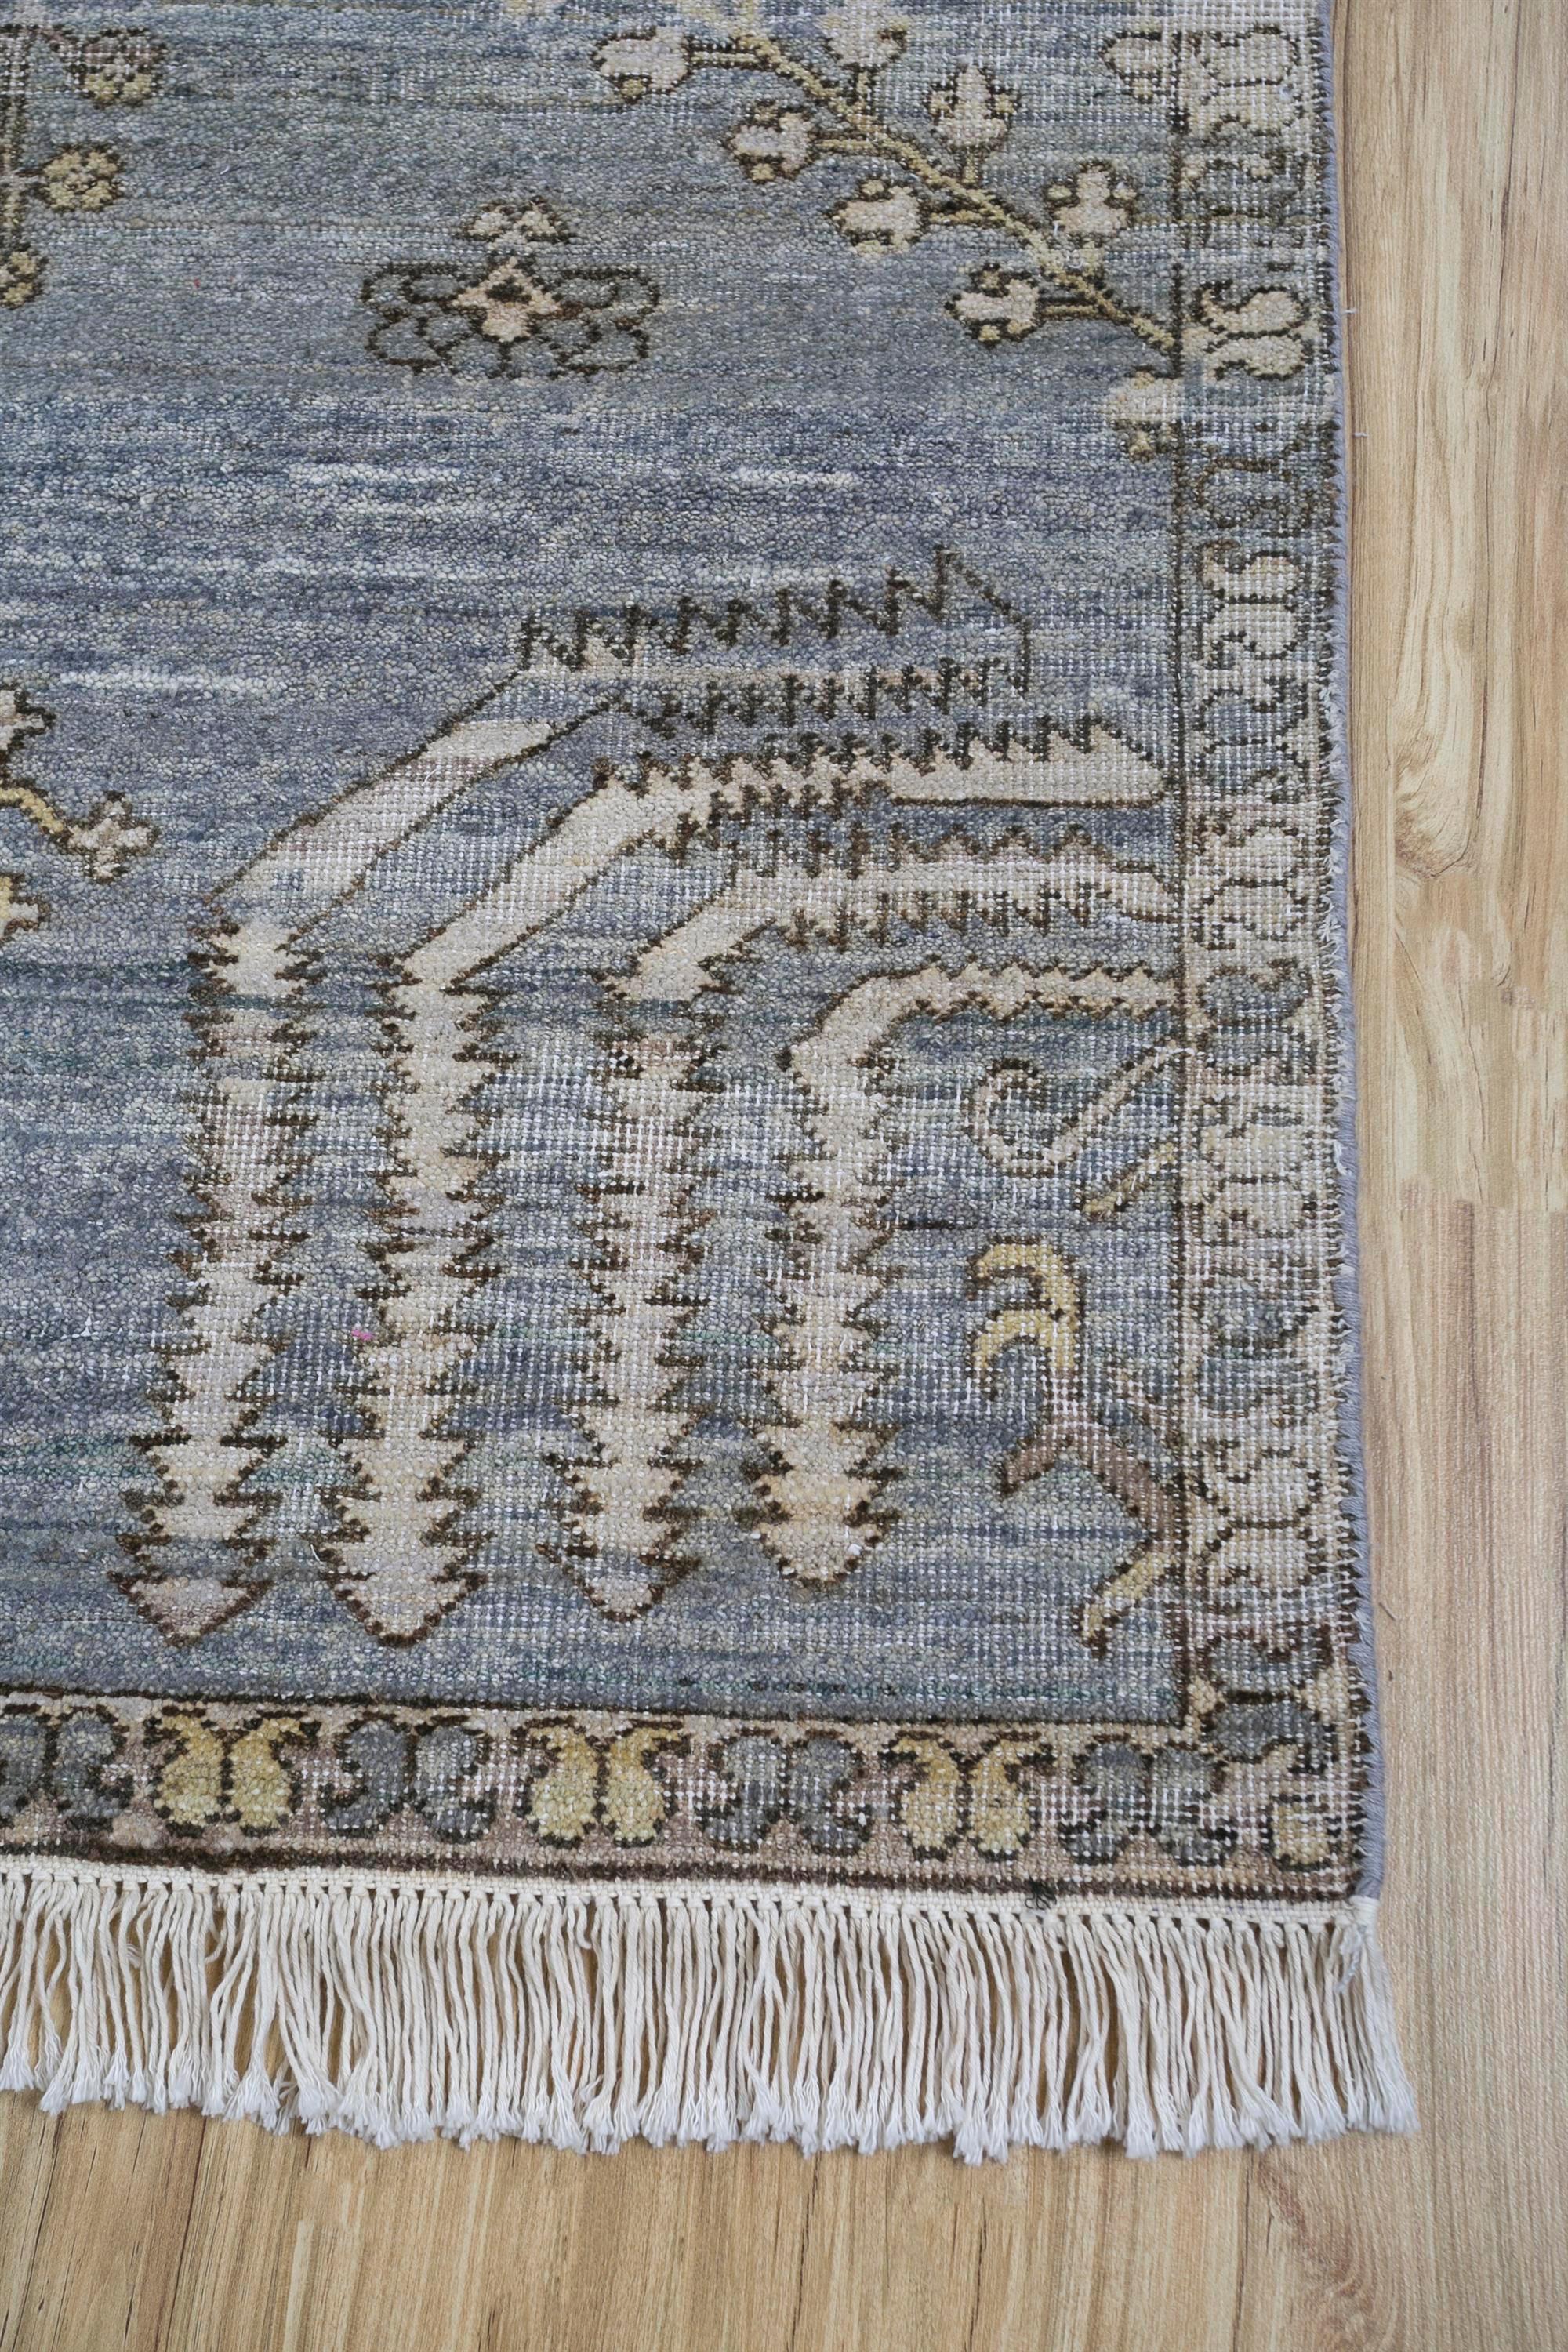 Are you looking for a rug that transcends the ordinary, a masterpiece that breathes life into your living space? Behold this Hand-Knotted Rug, a creation of exquisite artistry . Carved with intricate designs and patterns, it beckons you to a realm